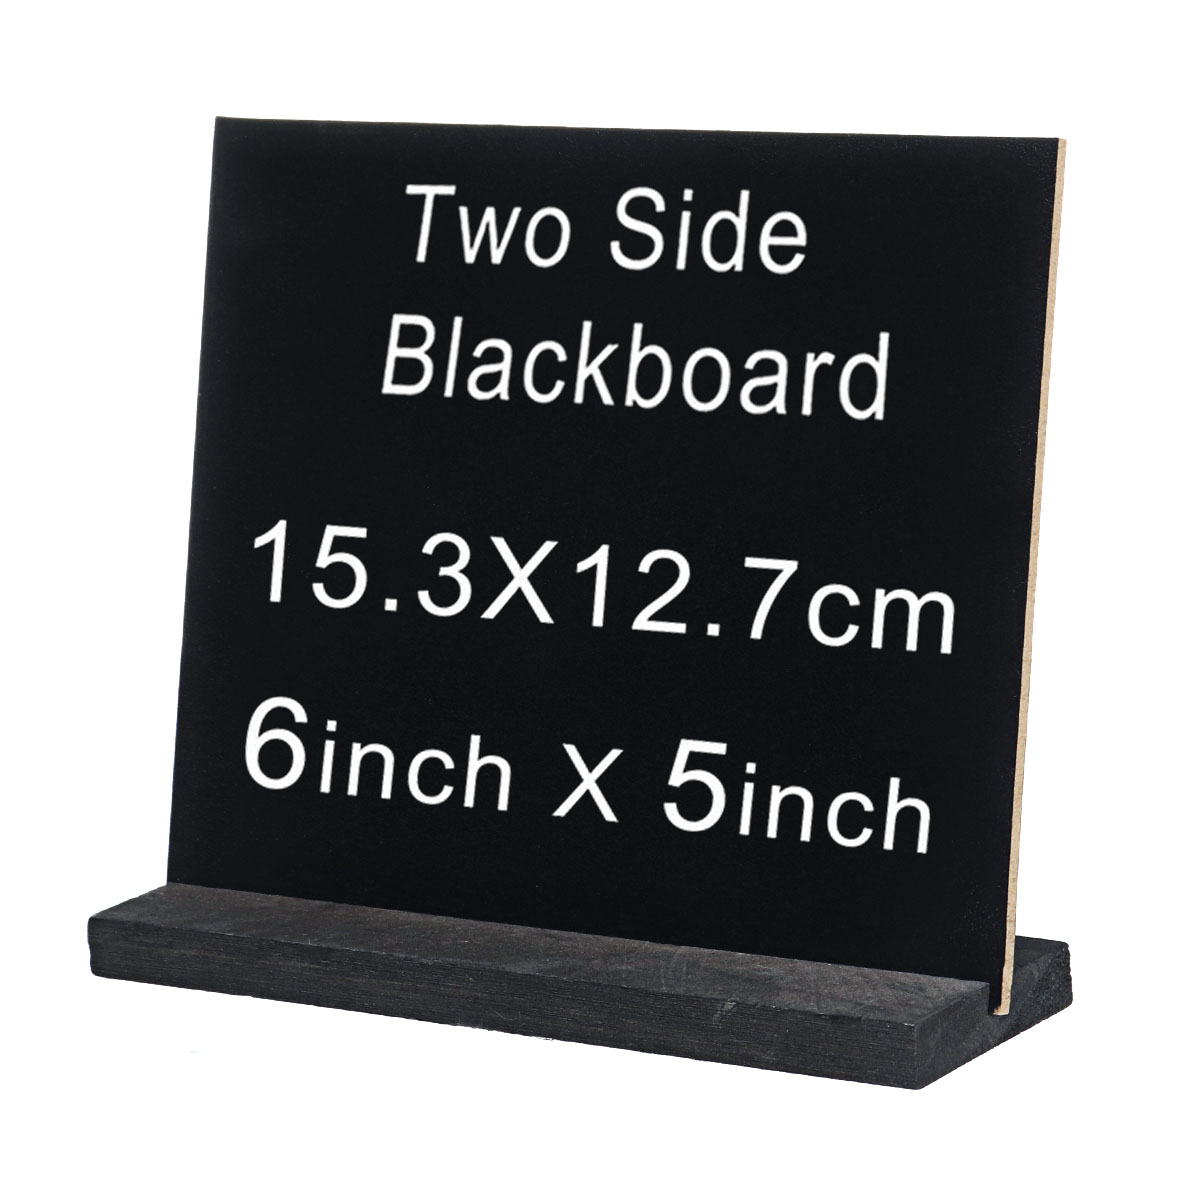 Blackboard-Double-Side-Rustic-Sign-Message-Board-Cafe-School-with-Base-Stands-1629696-8